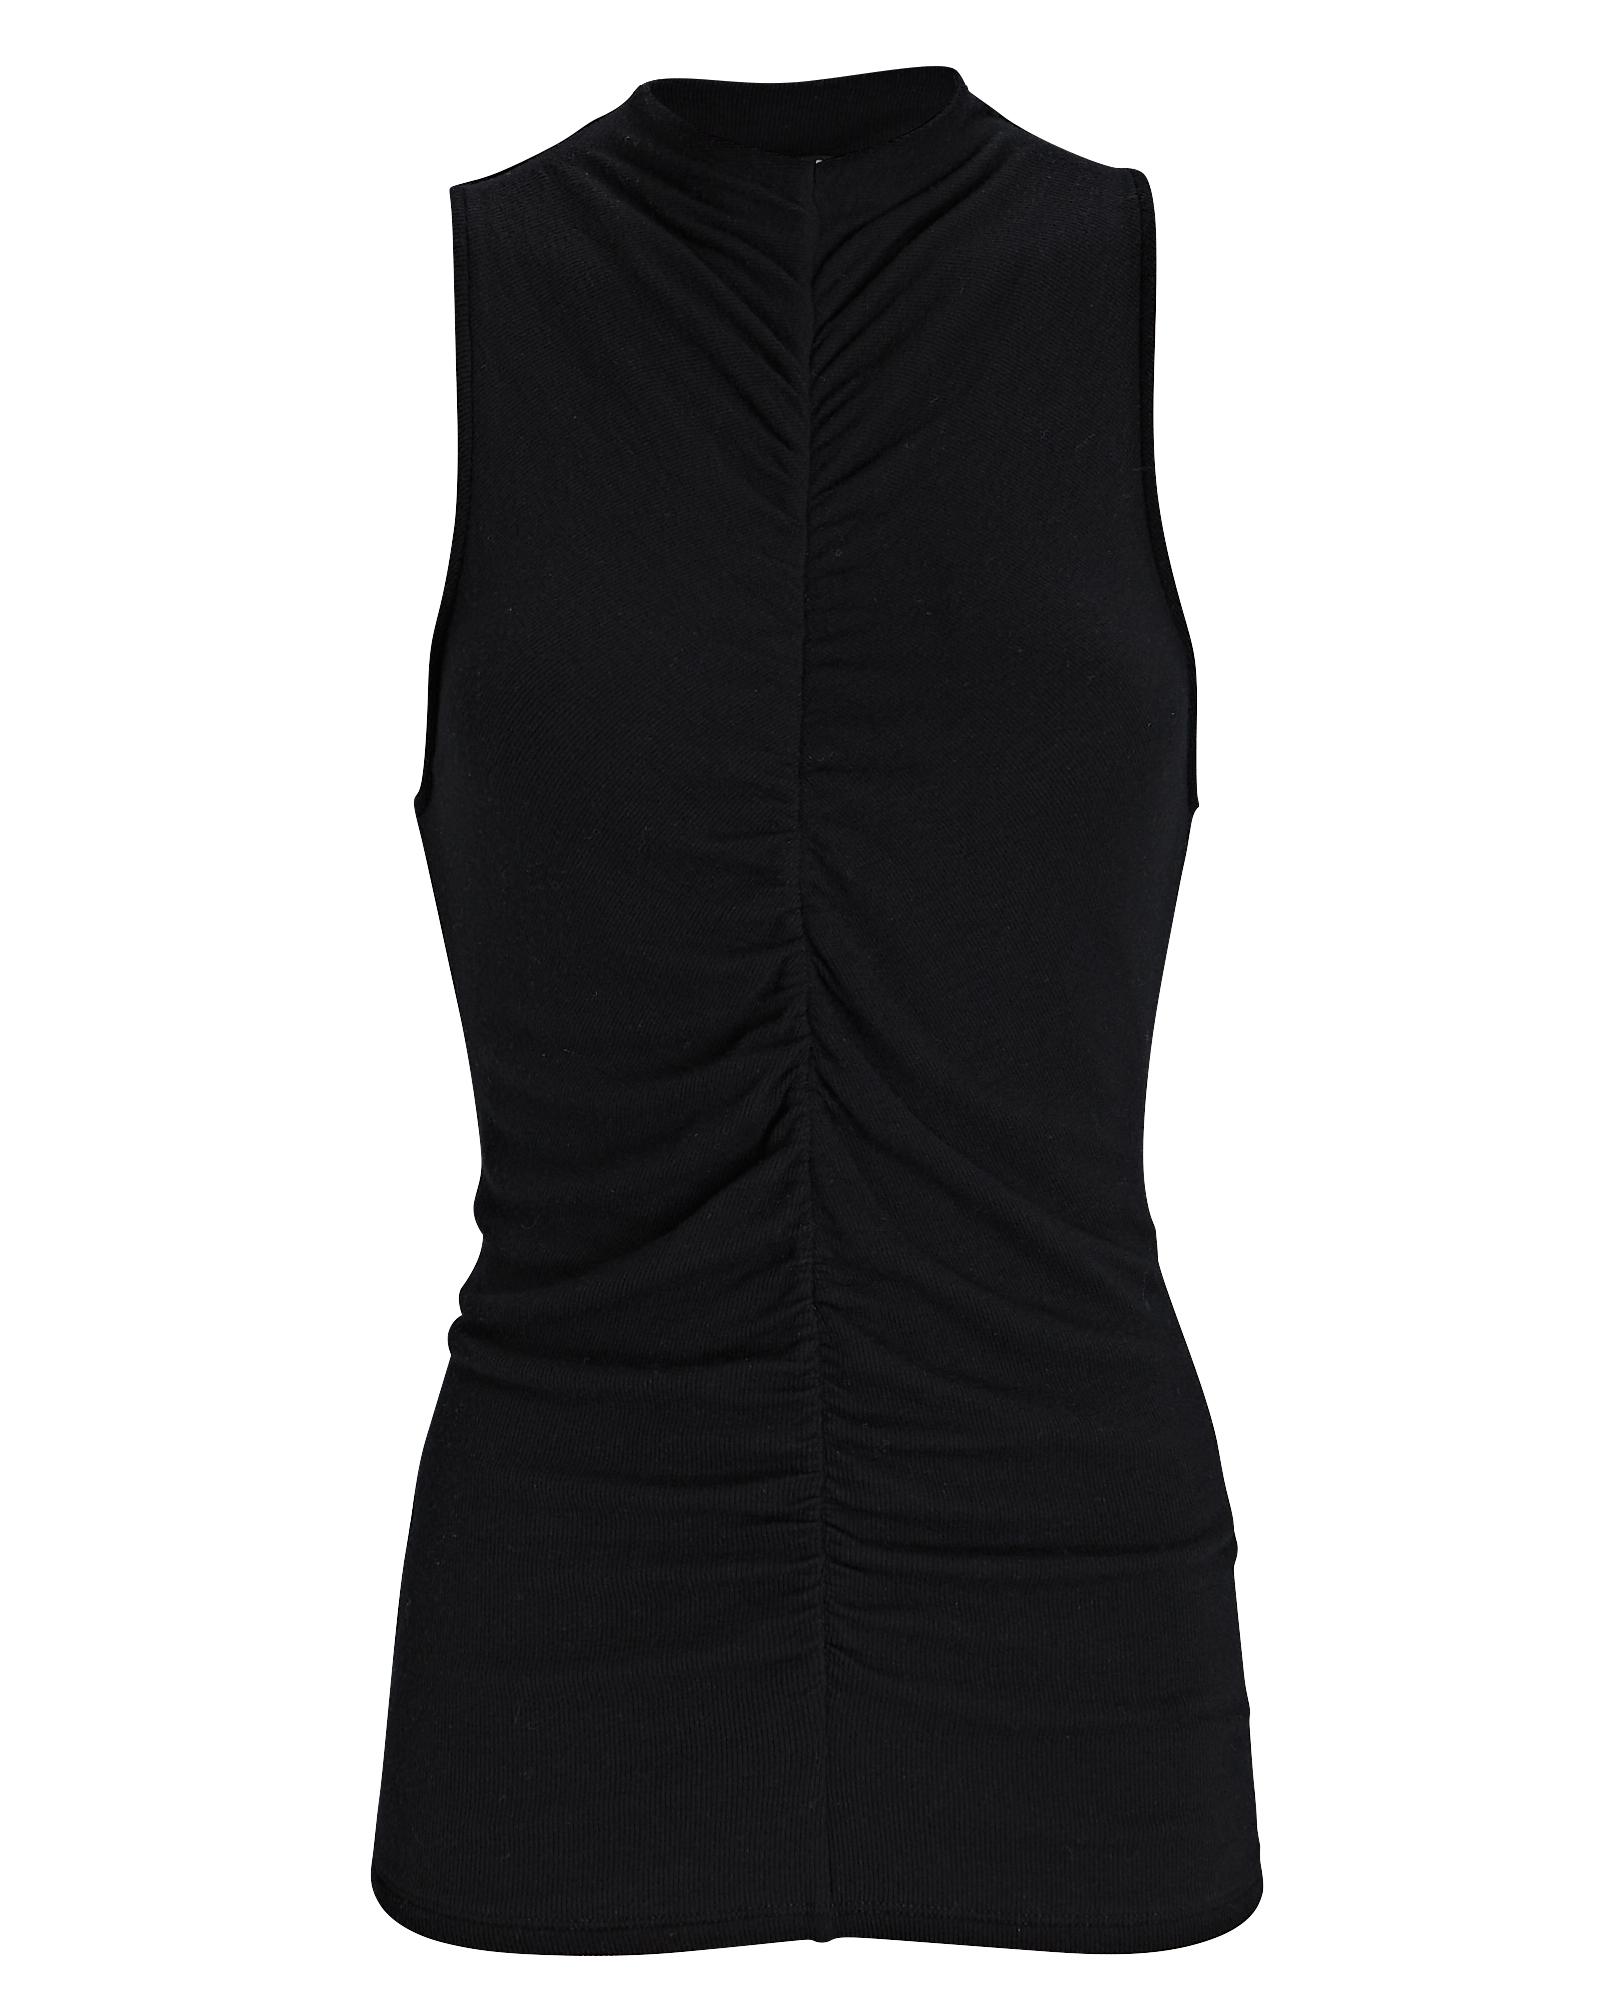 Vargas Ruched Knit Tank Top